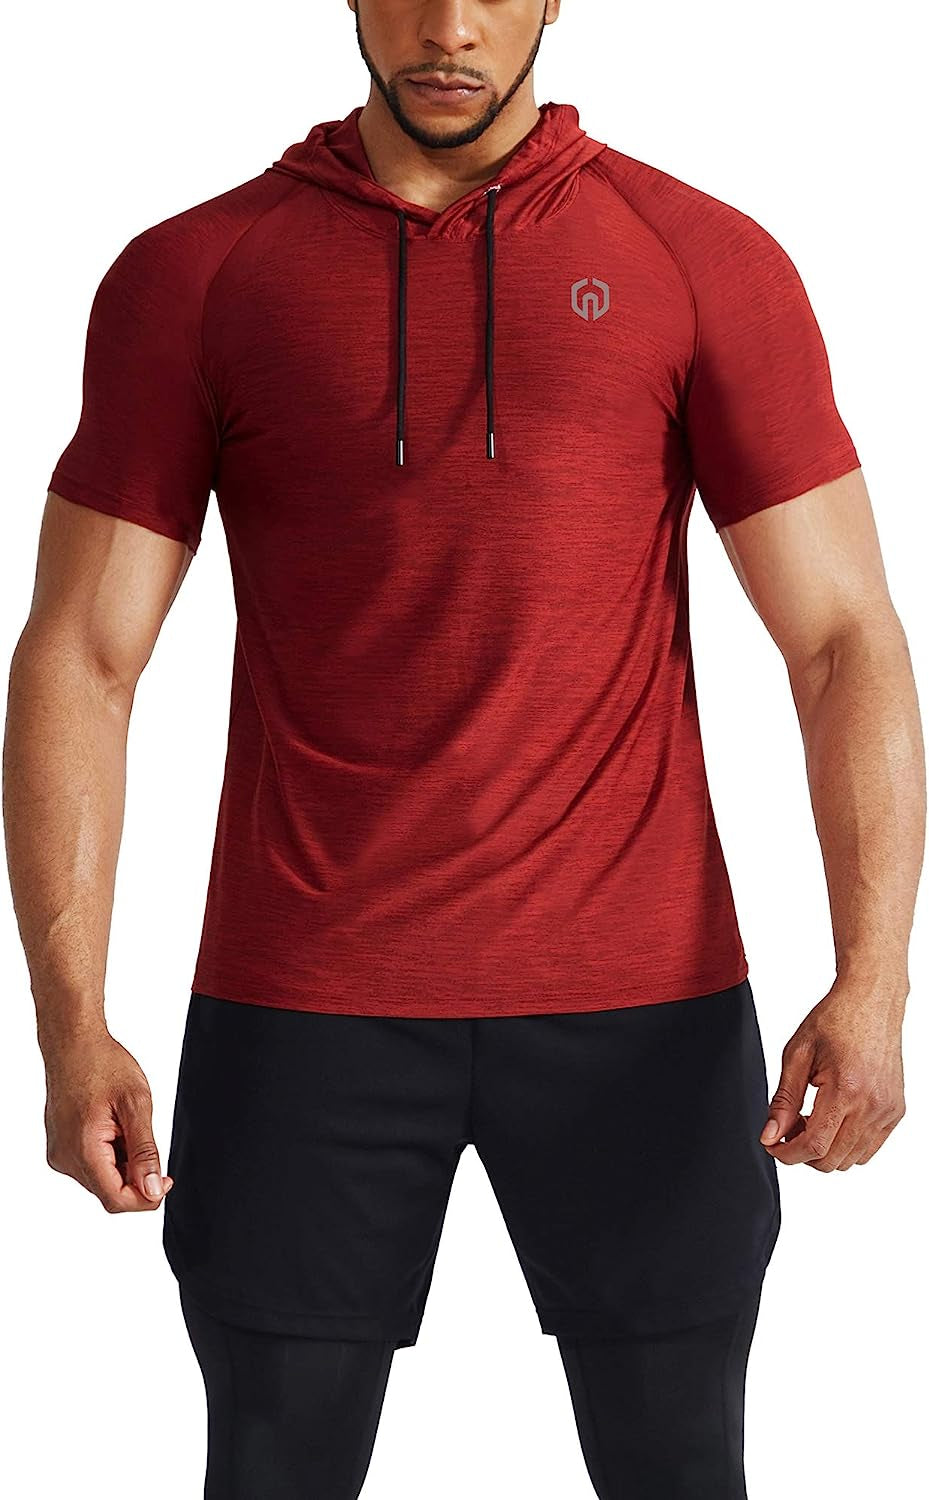 "Enhance Your Comfort and Style with the Men's Dry Fit Performance Athletic Shirt with Hoods!"